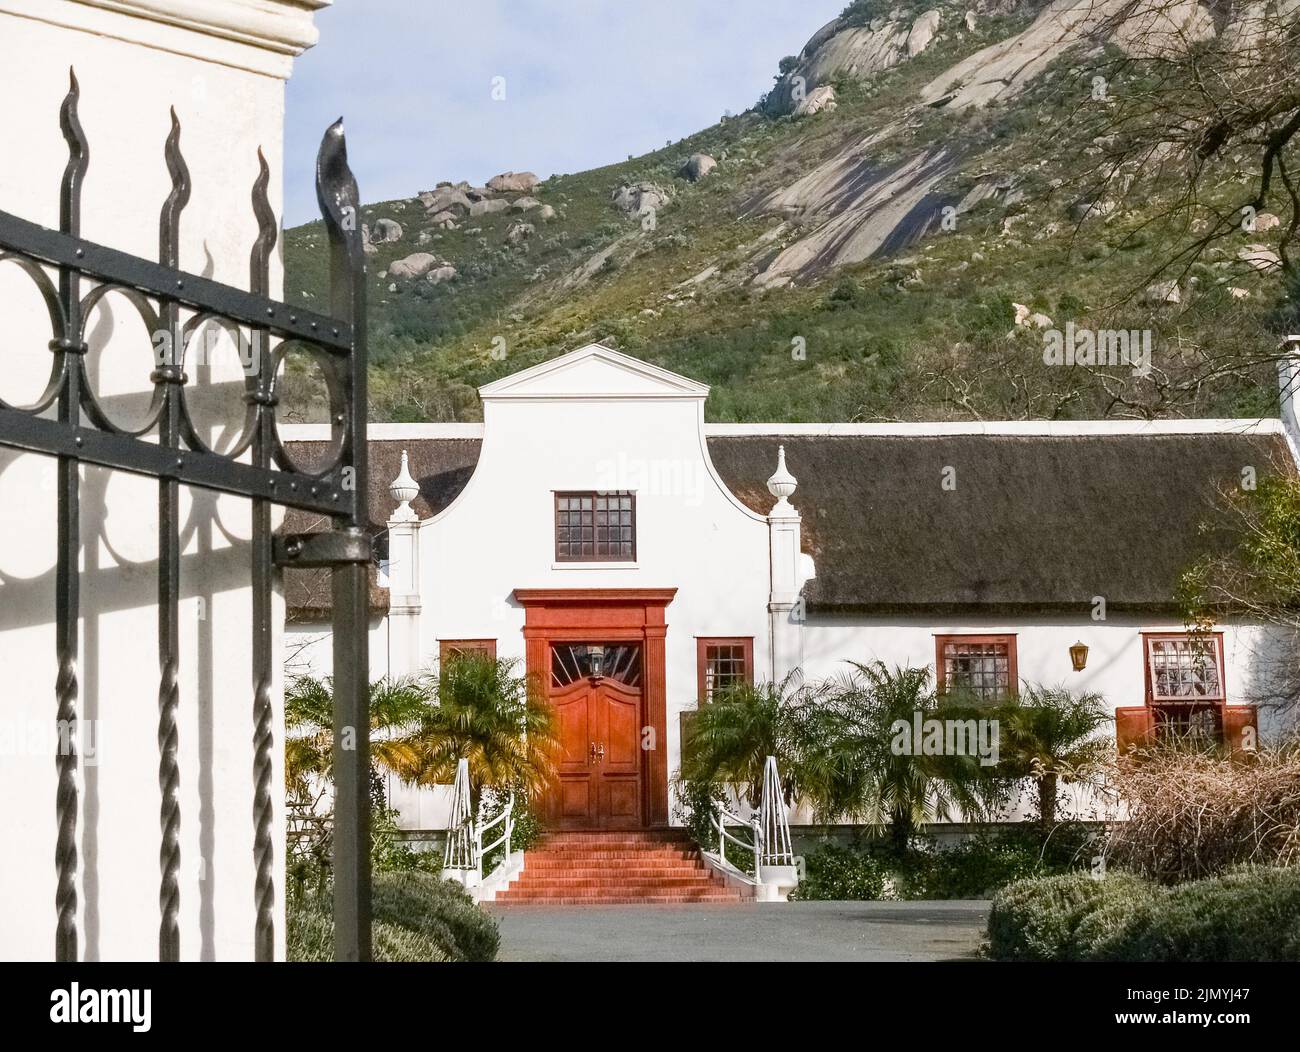 Stylish building facade in Cape Dutch architectural style in South Africa. Stock Photo